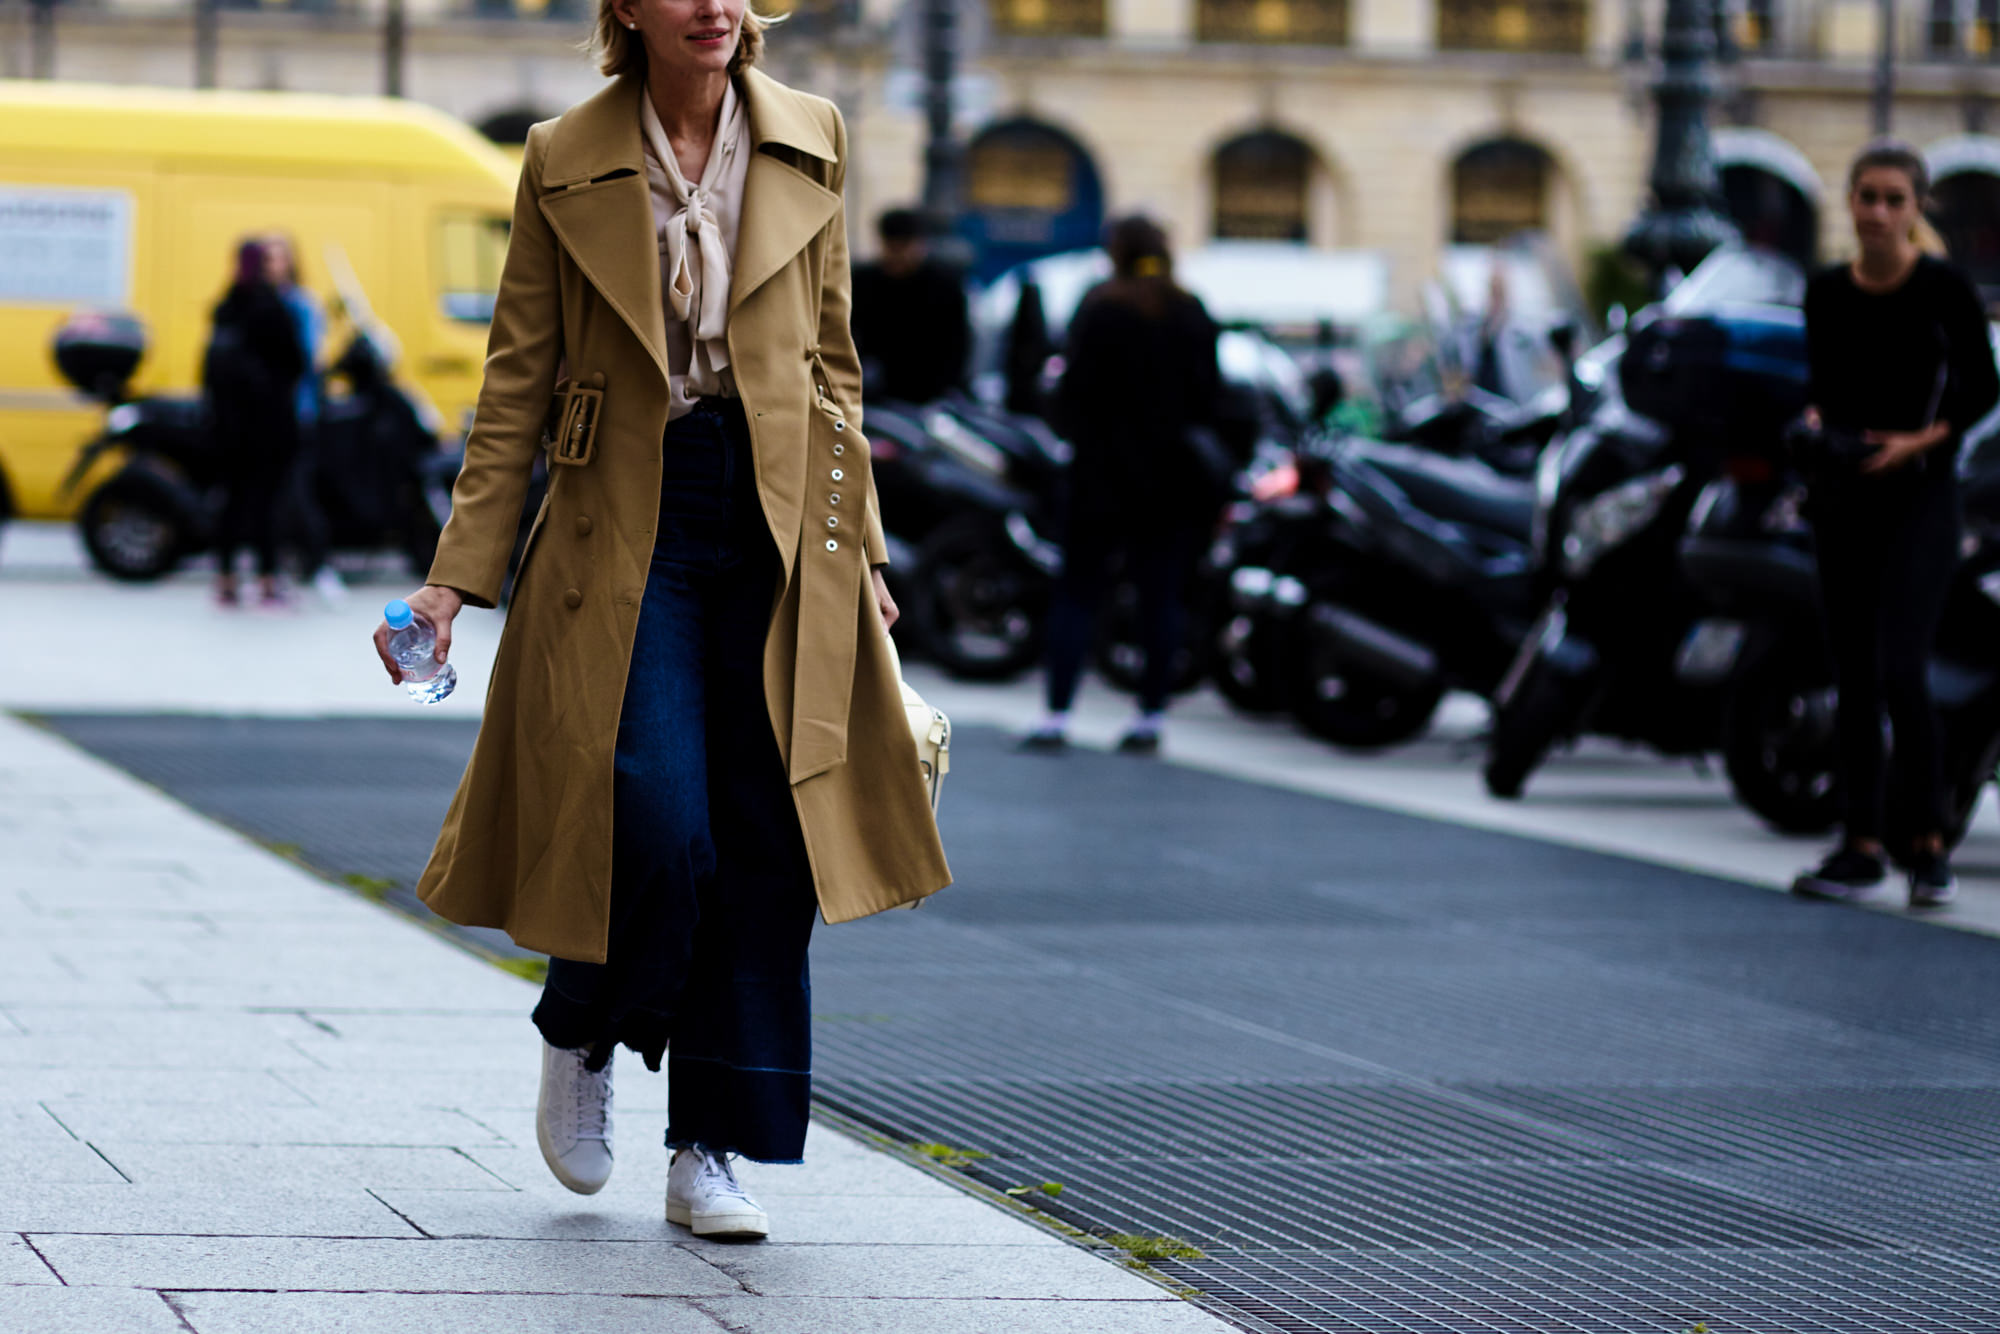 Paris Haute Couture Street Style: A woman wearing jeans and a trench coat after a fashion show in Paris, France